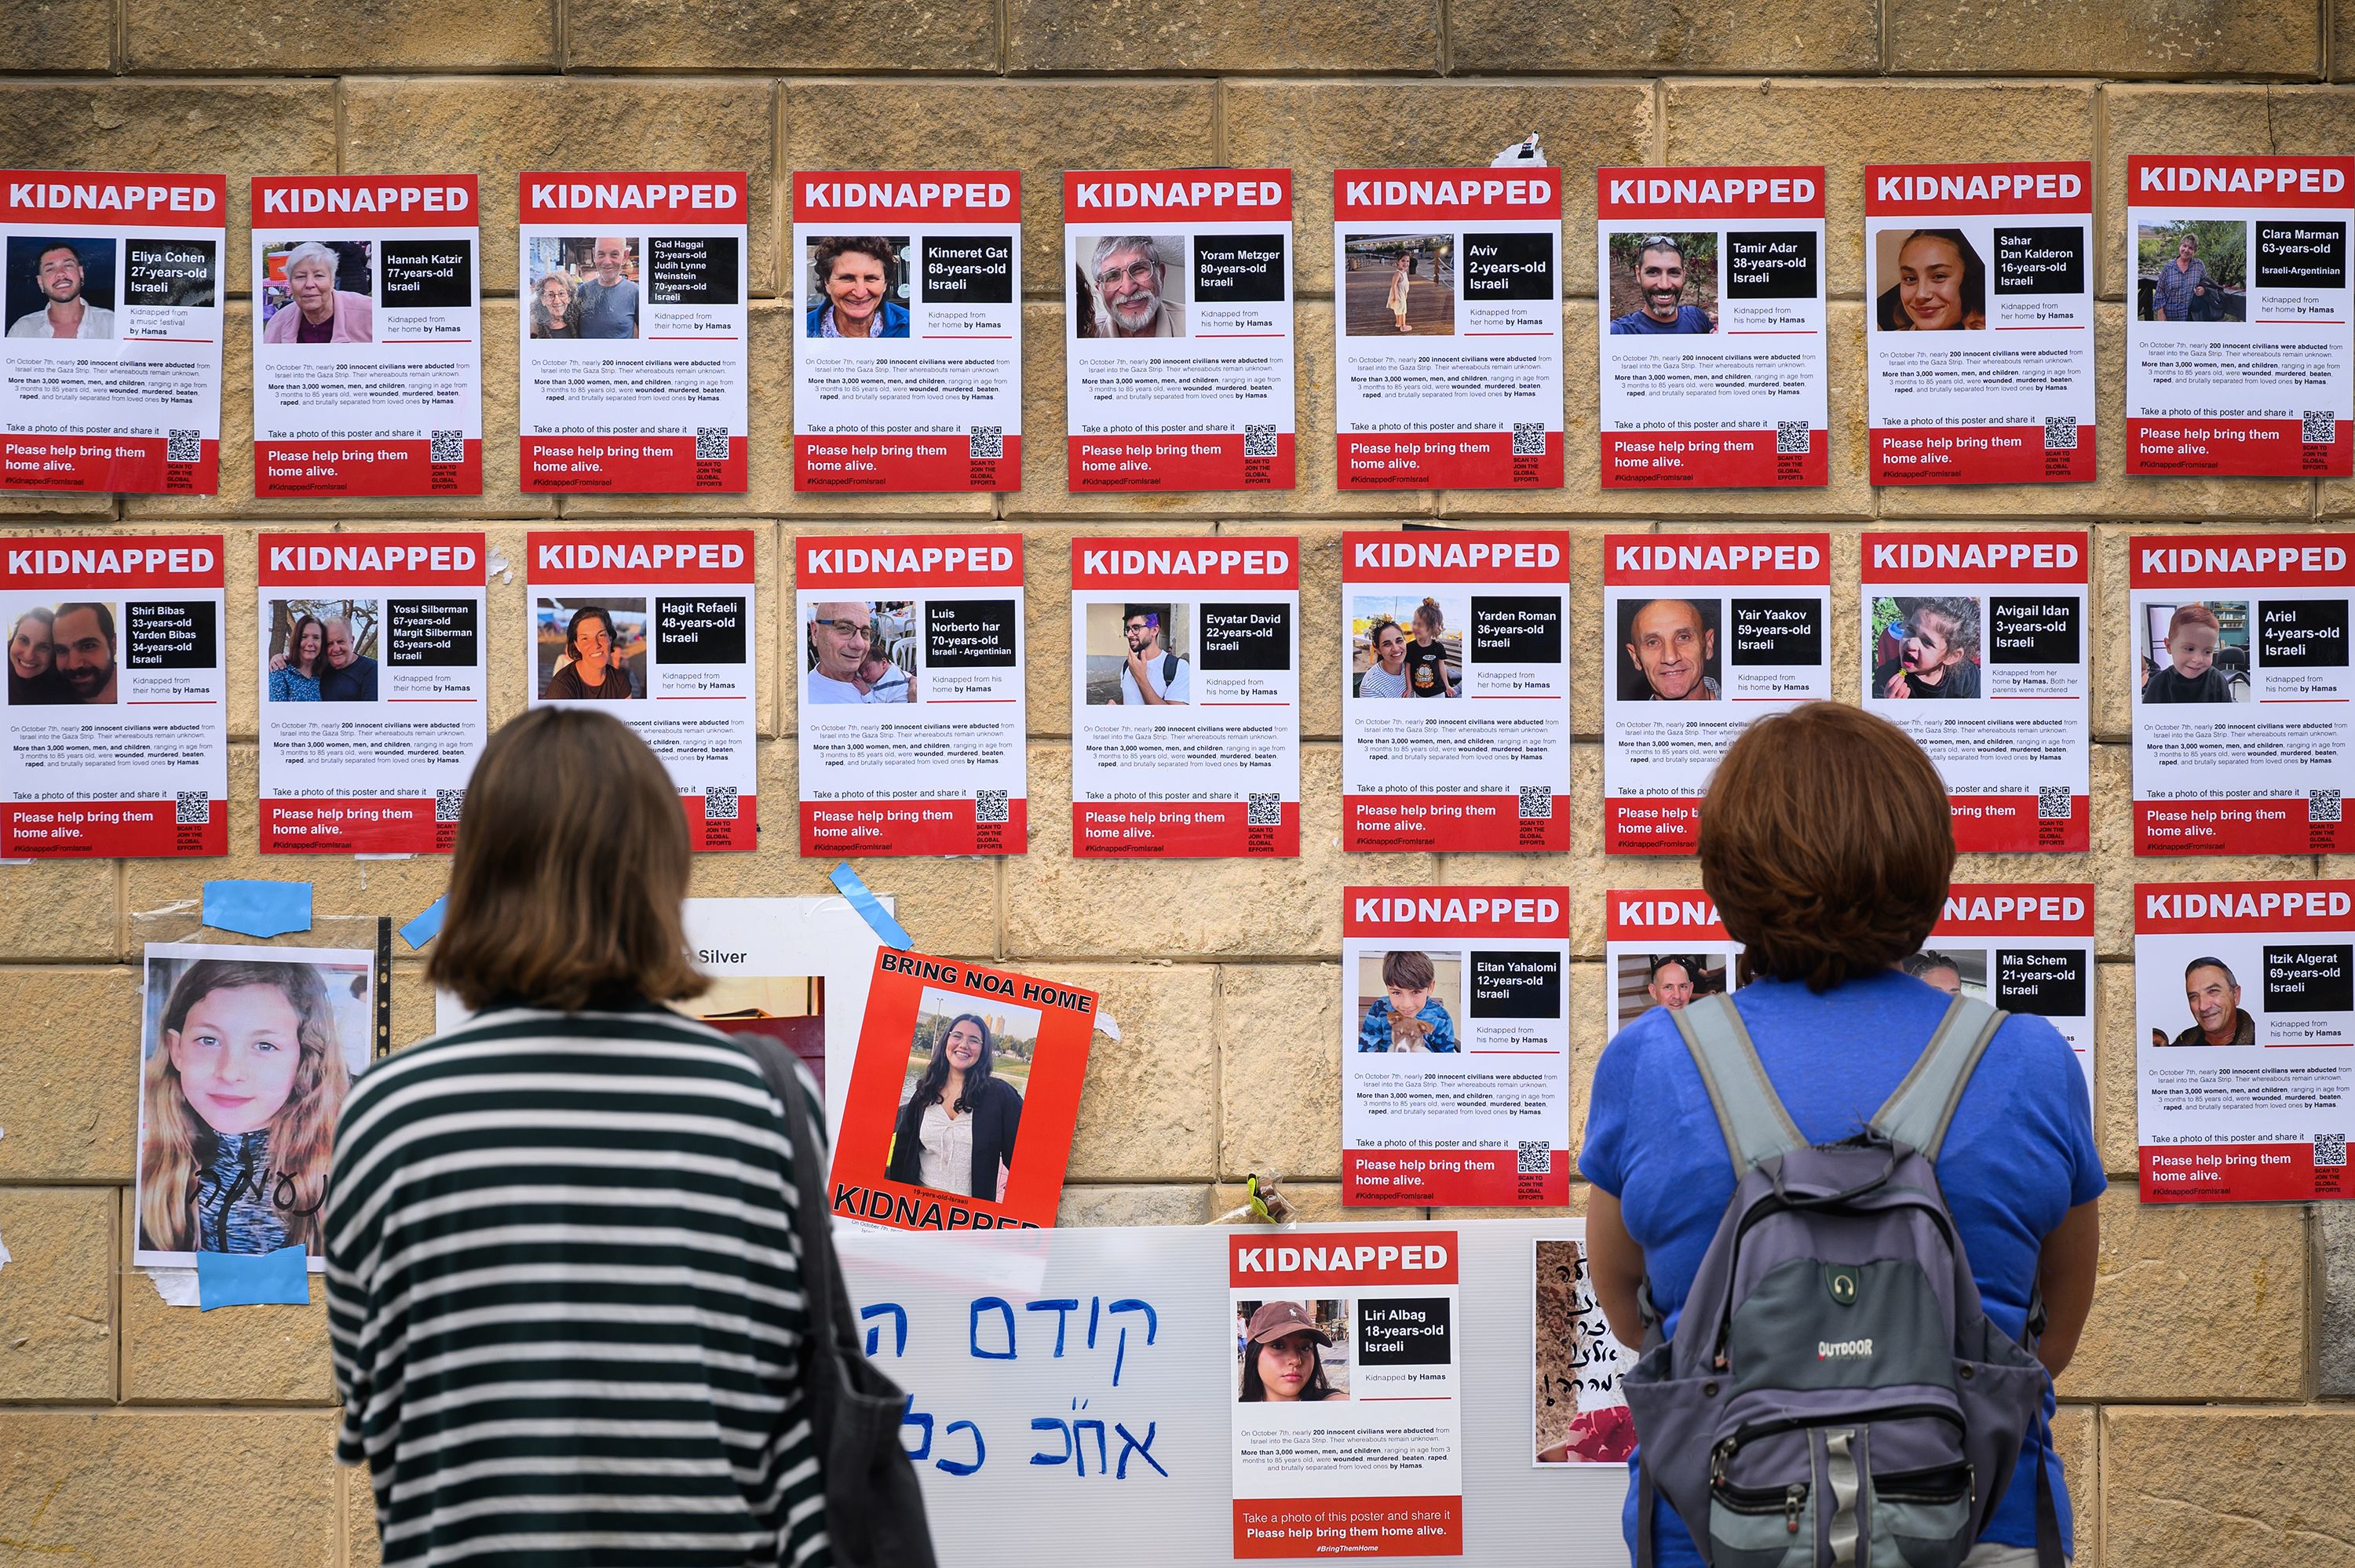 Photographs of people taken hostage by Hamas are seen in Tel Aviv on October 18.